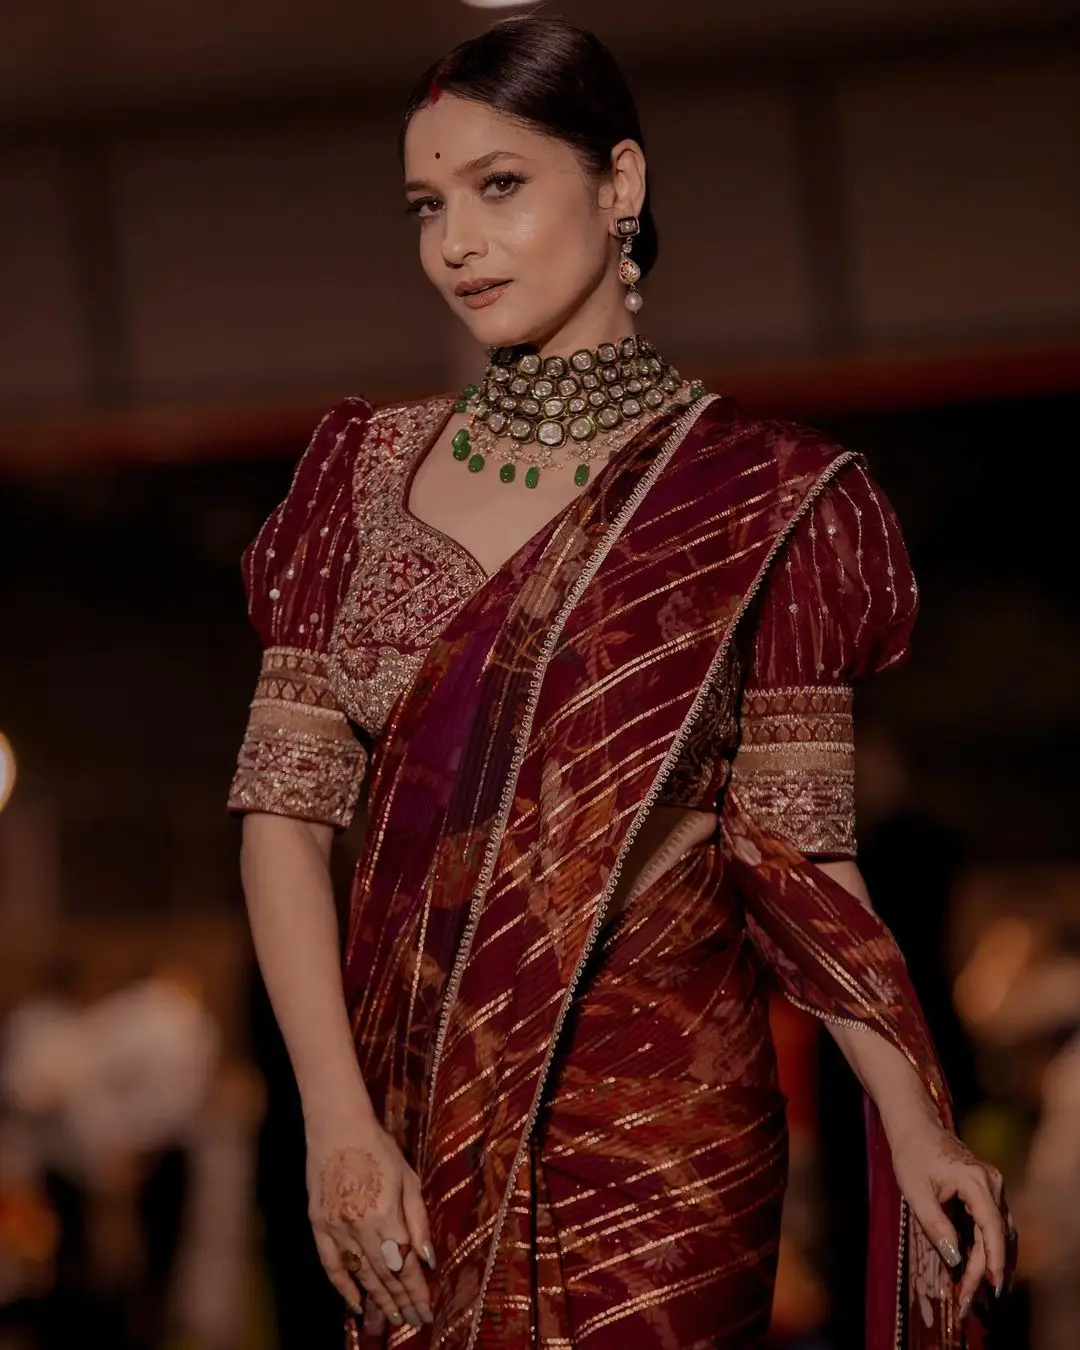 ANKITA LOKHANDE IN INDIAN TRADITIONAL MAROON SAREE BLOUSE